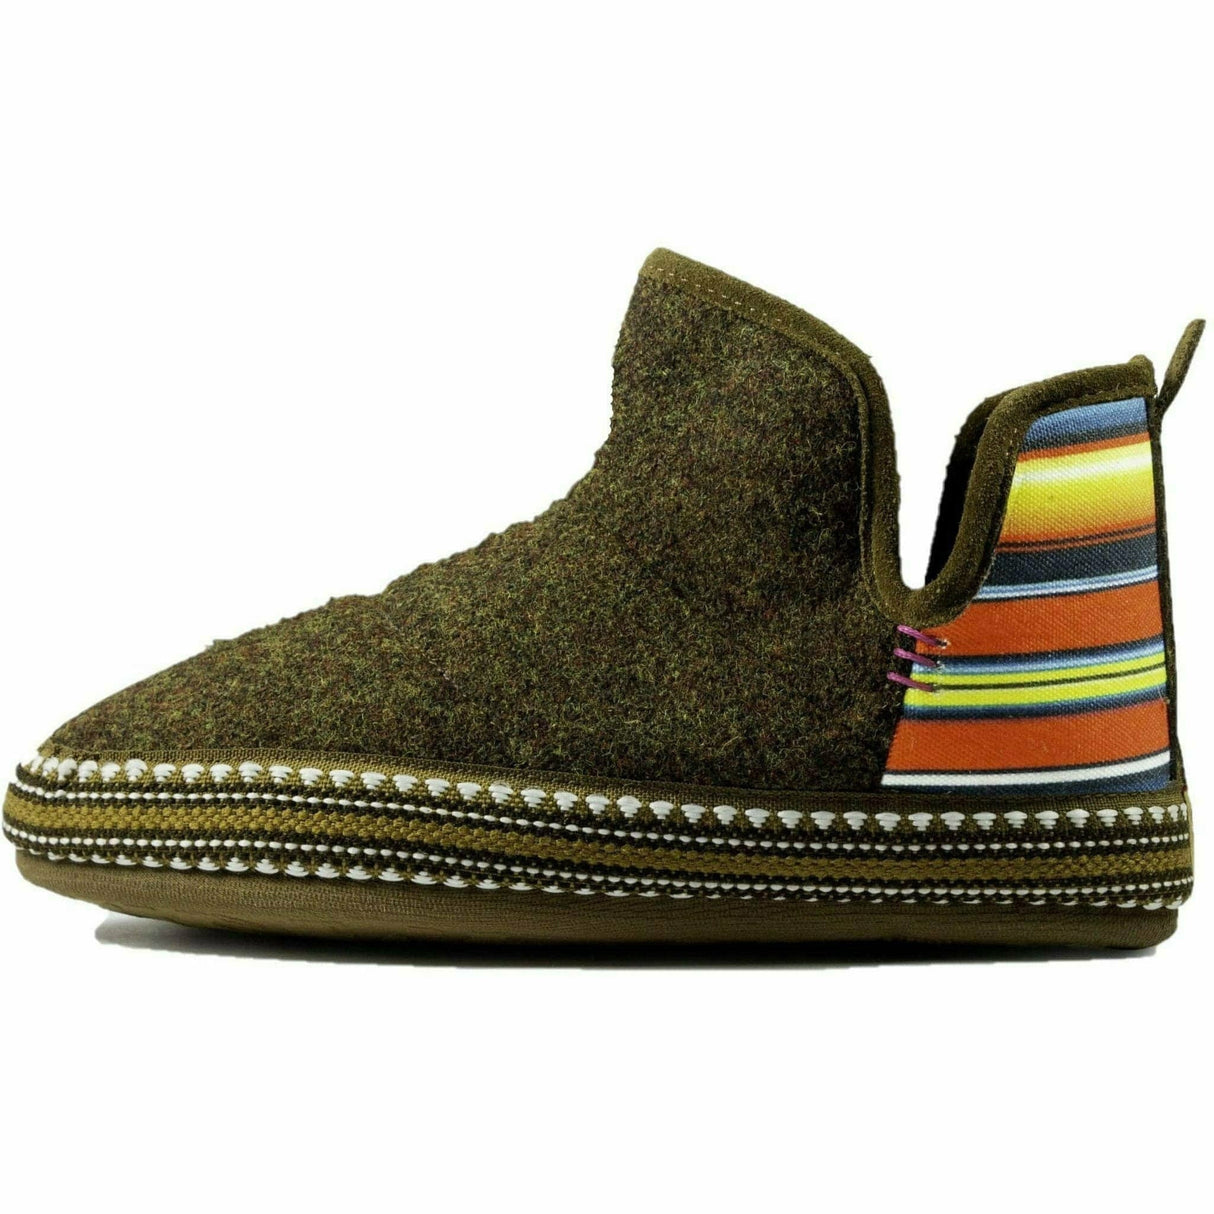 Ariat Womens Bootie Slippers - Clearance  -  X-Small / Serape Stripe